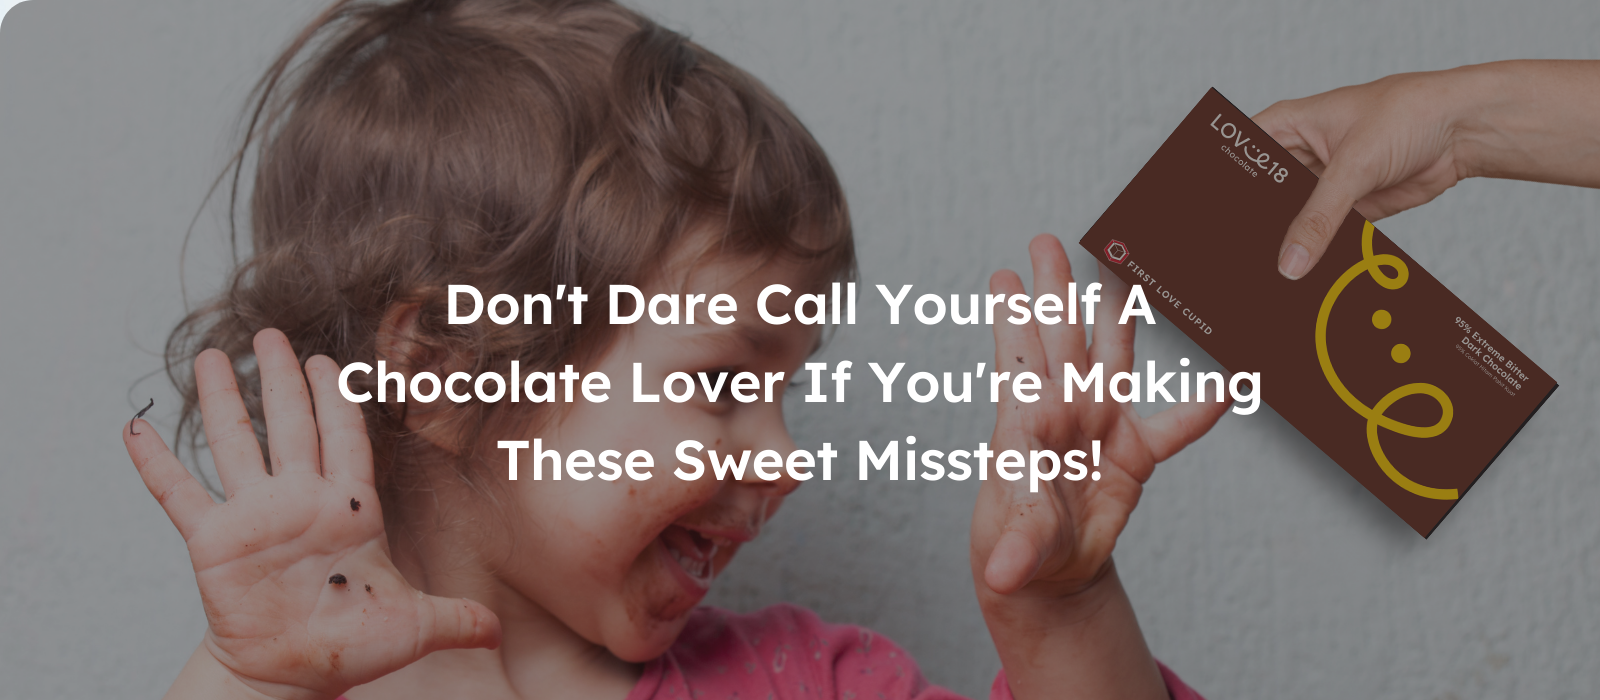 Don't Dare Call Yourself a Chocolate Lover If You're Making These Sweet Missteps!